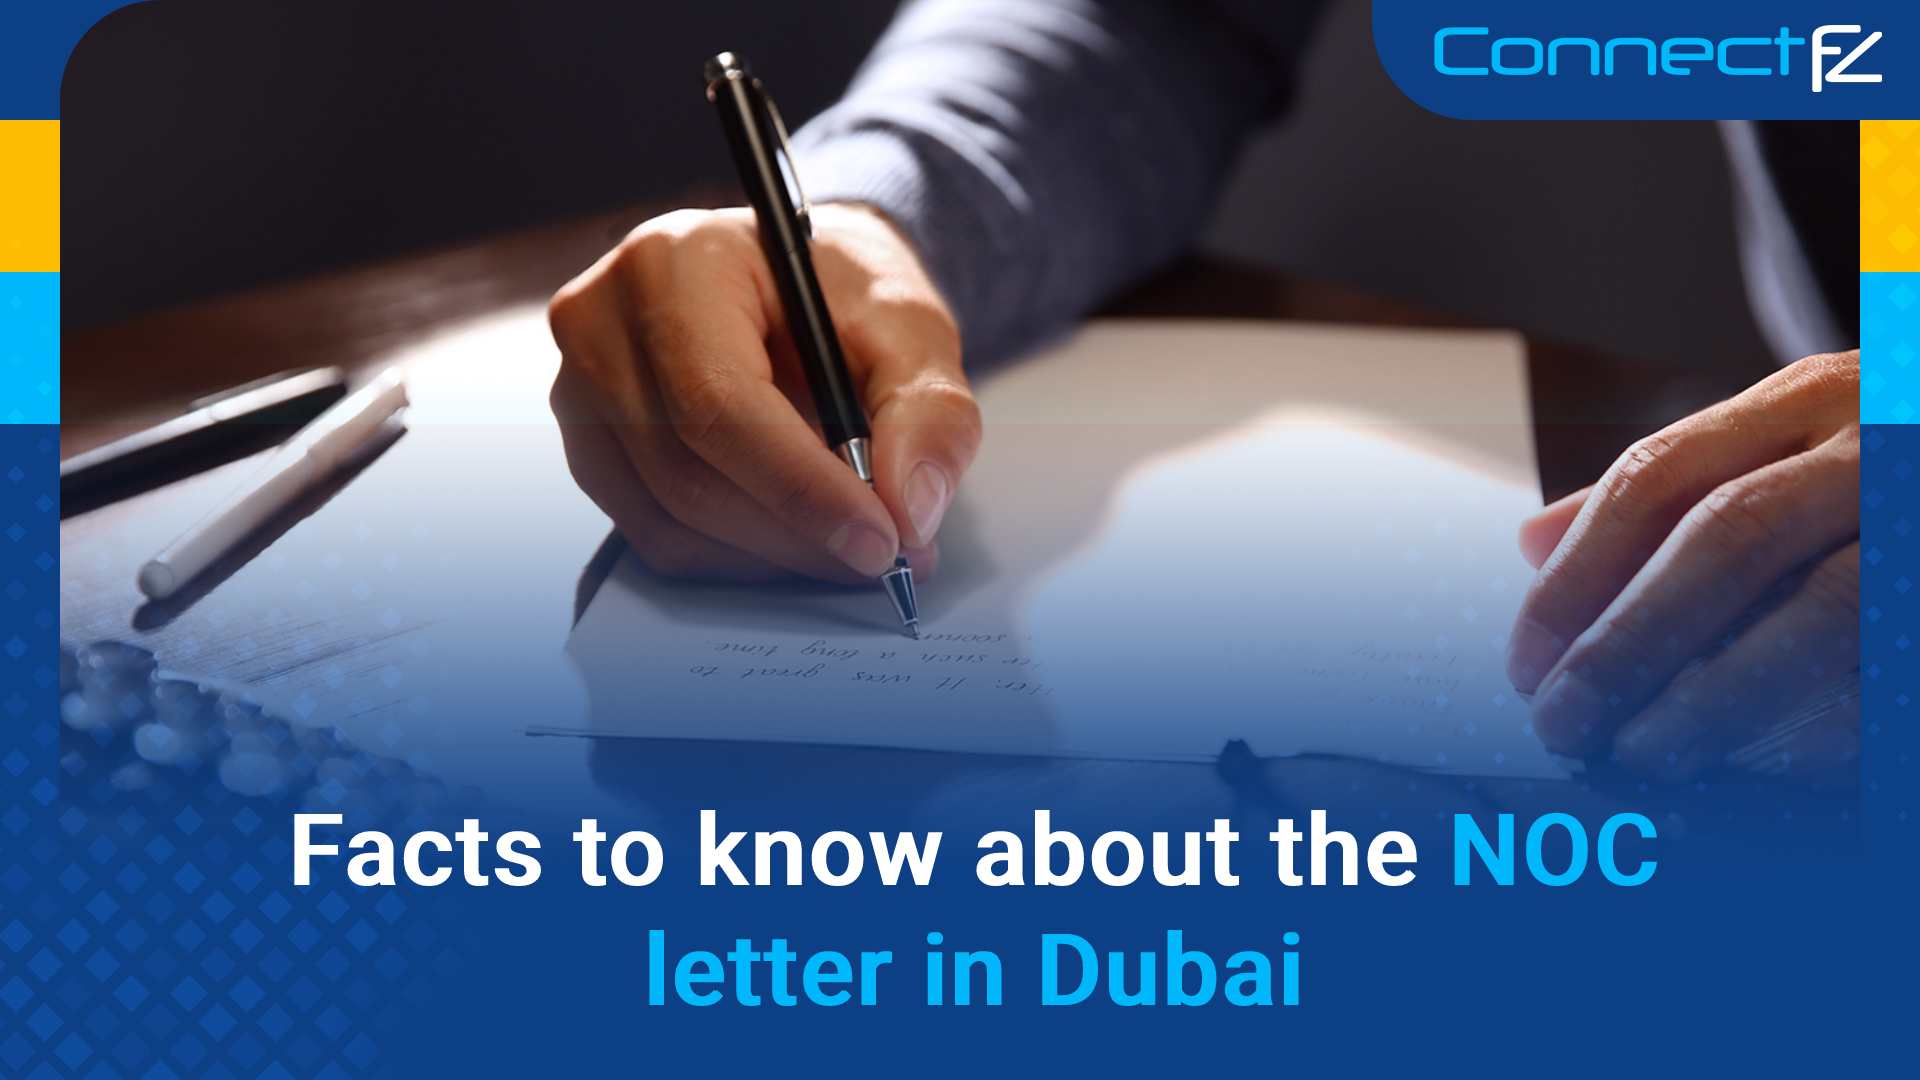 Facts to know about the NOC letter in Dubai